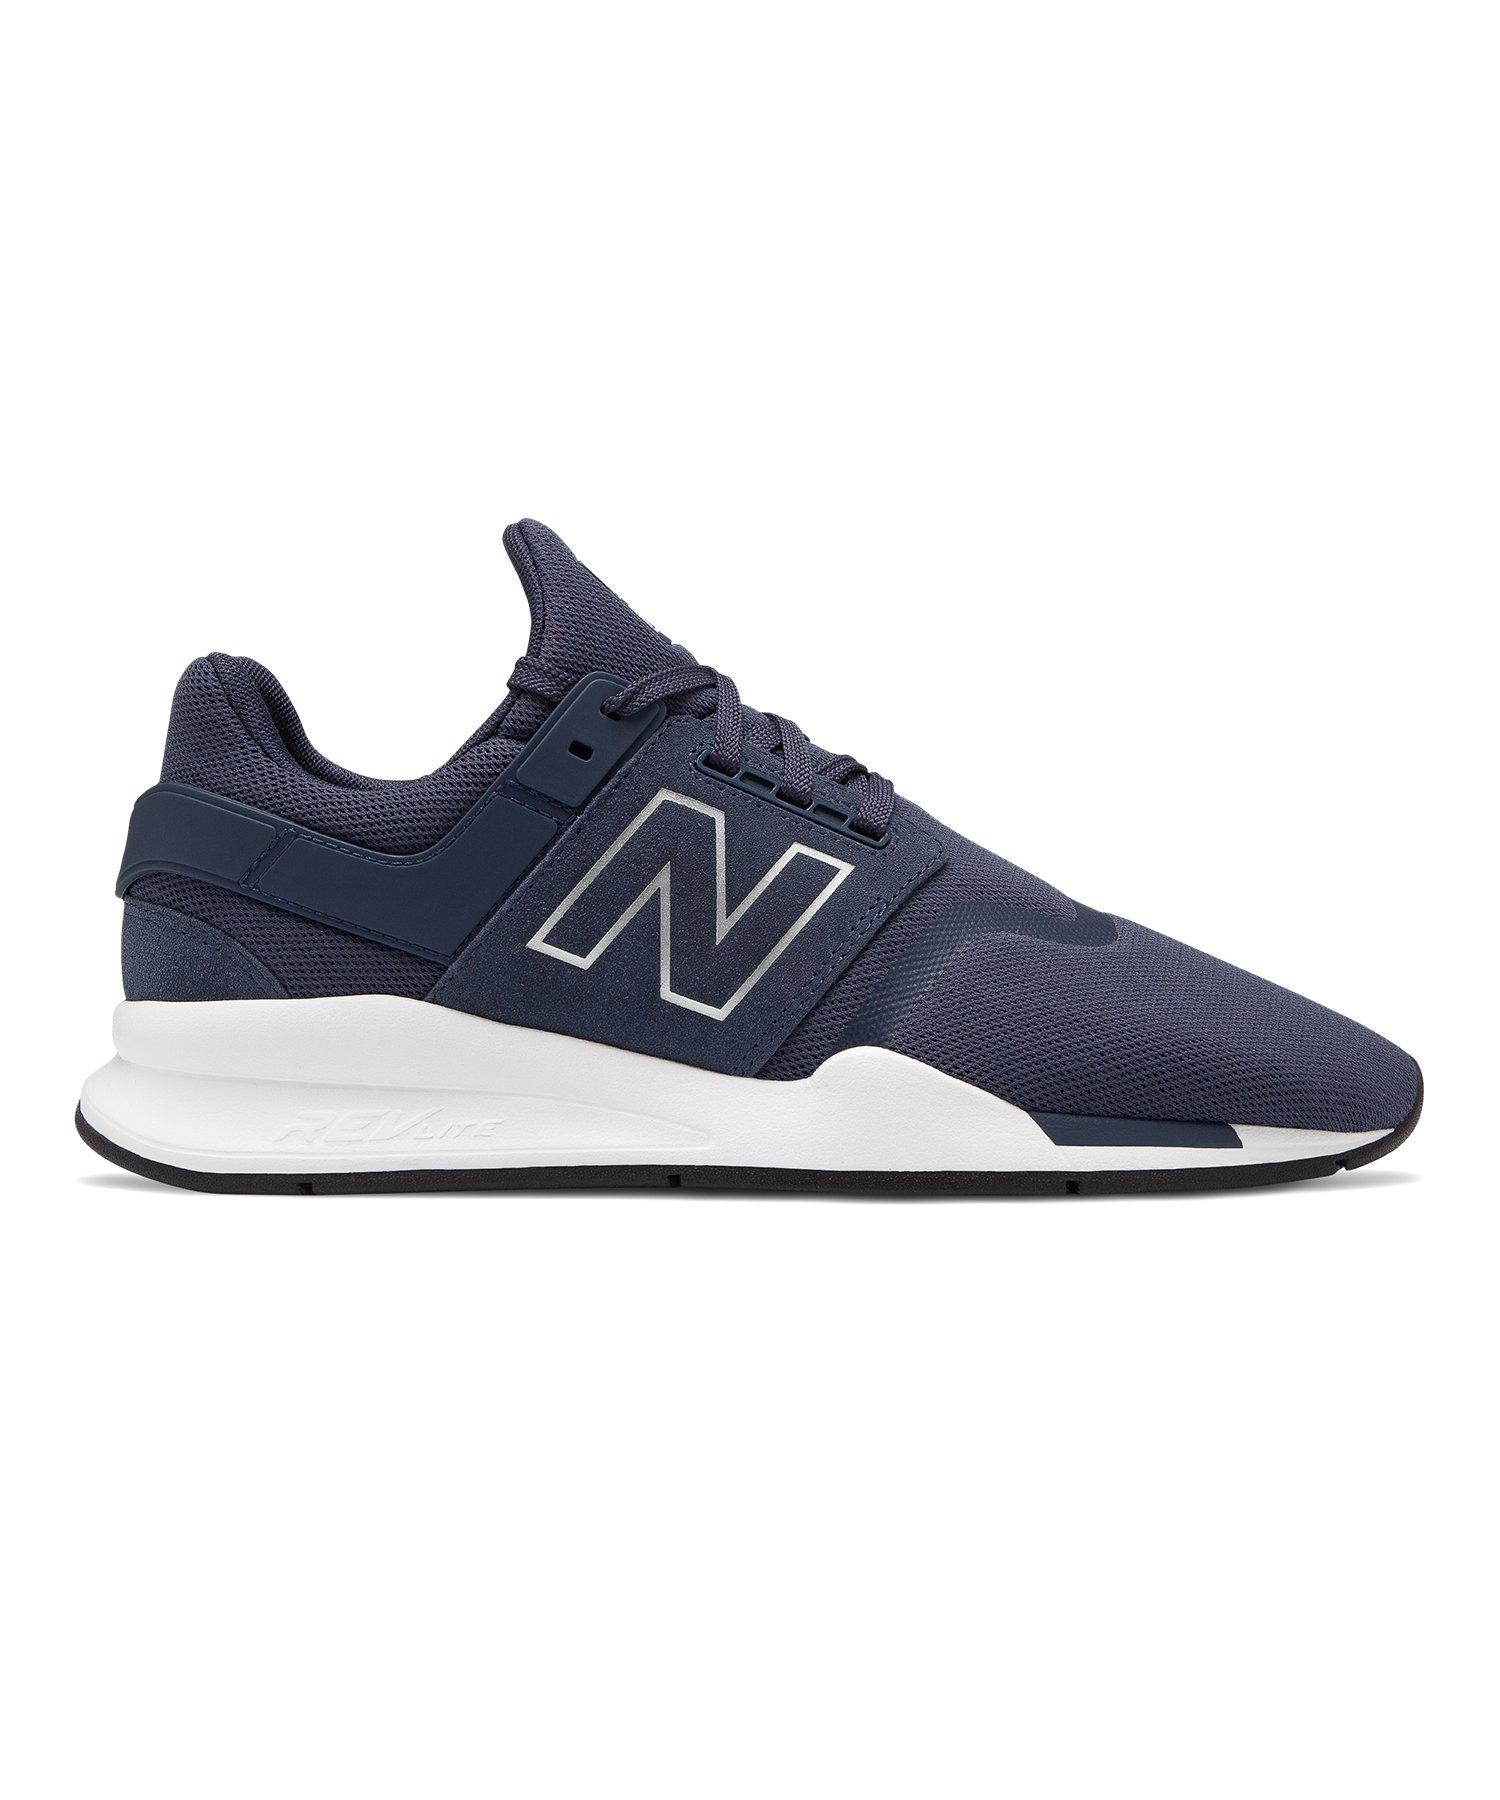 New Balance Leather 247v2 In Navy in Blue for Men - Lyst